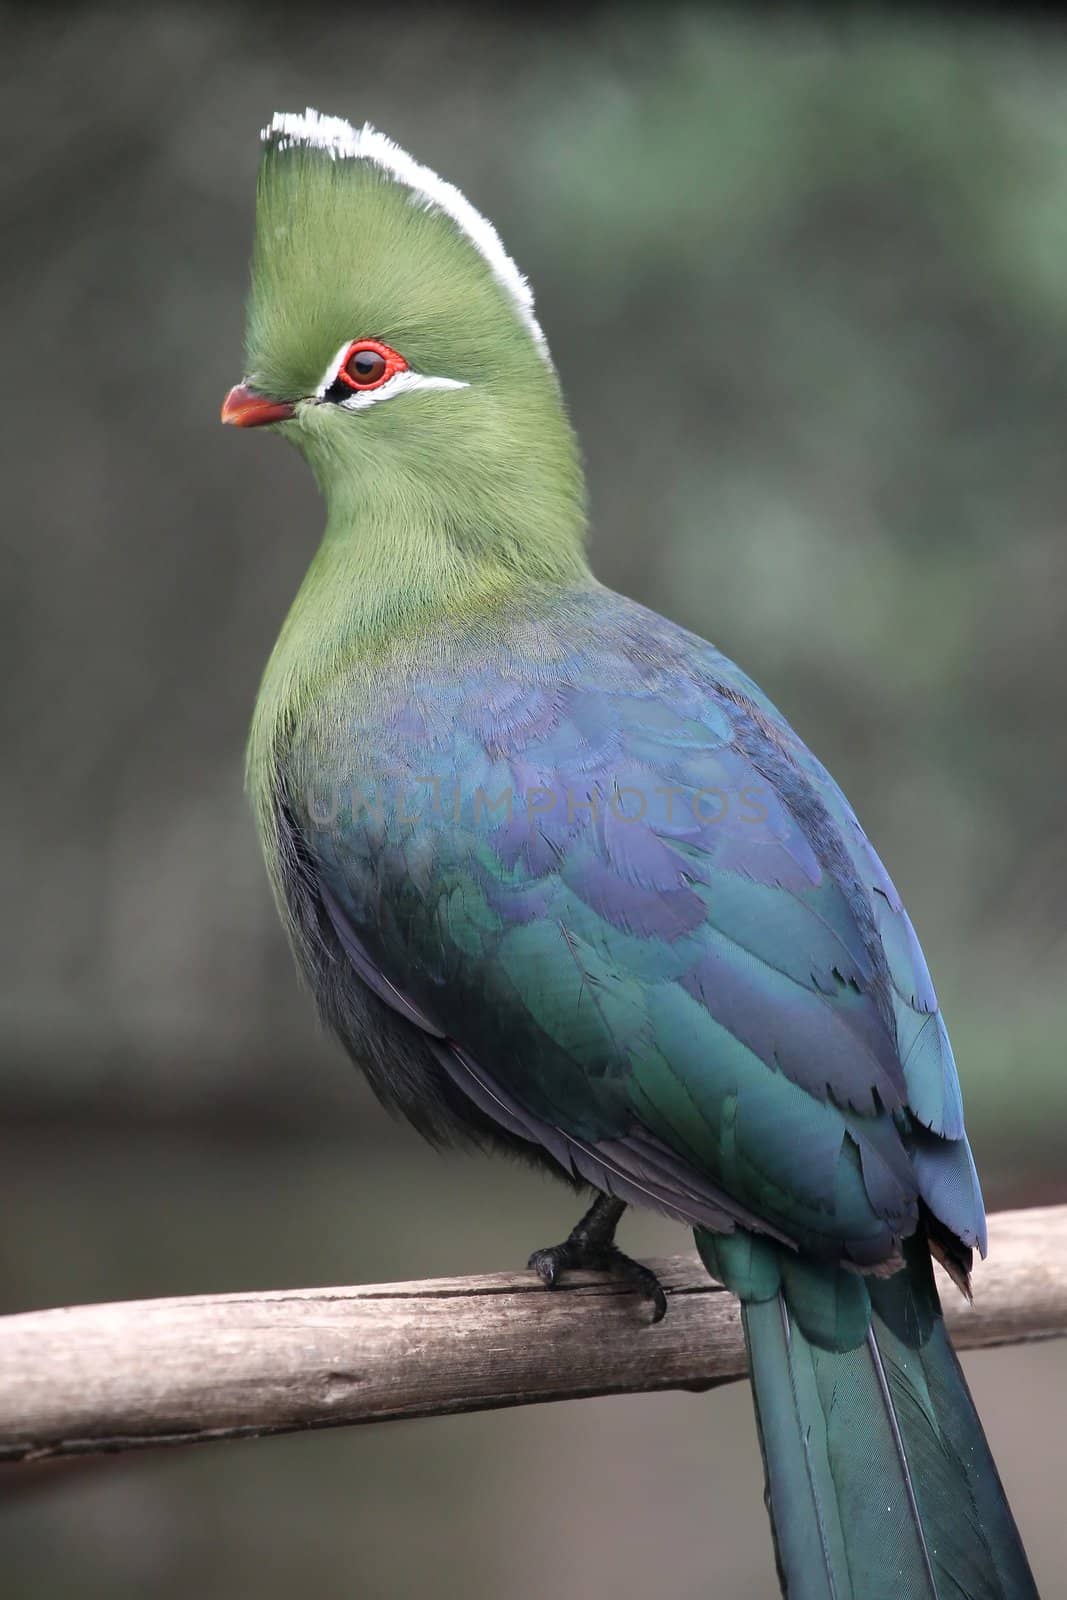 Beautiful Knysna Loerie or Turaco bird with green and blue feathers